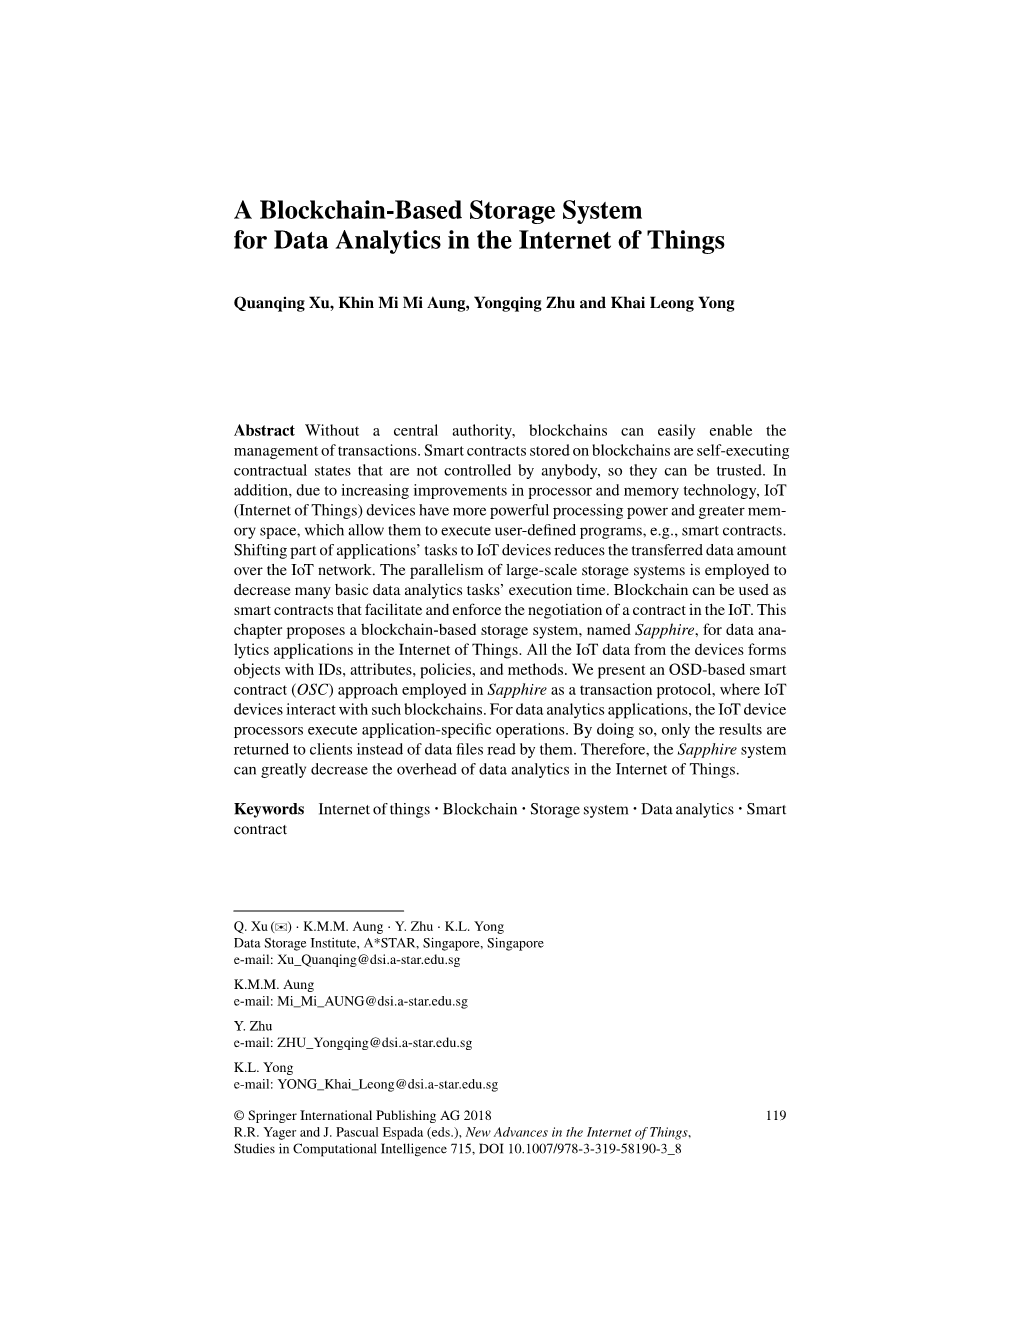 A Blockchain-Based Storage System for Data Analytics in the Internet of Things